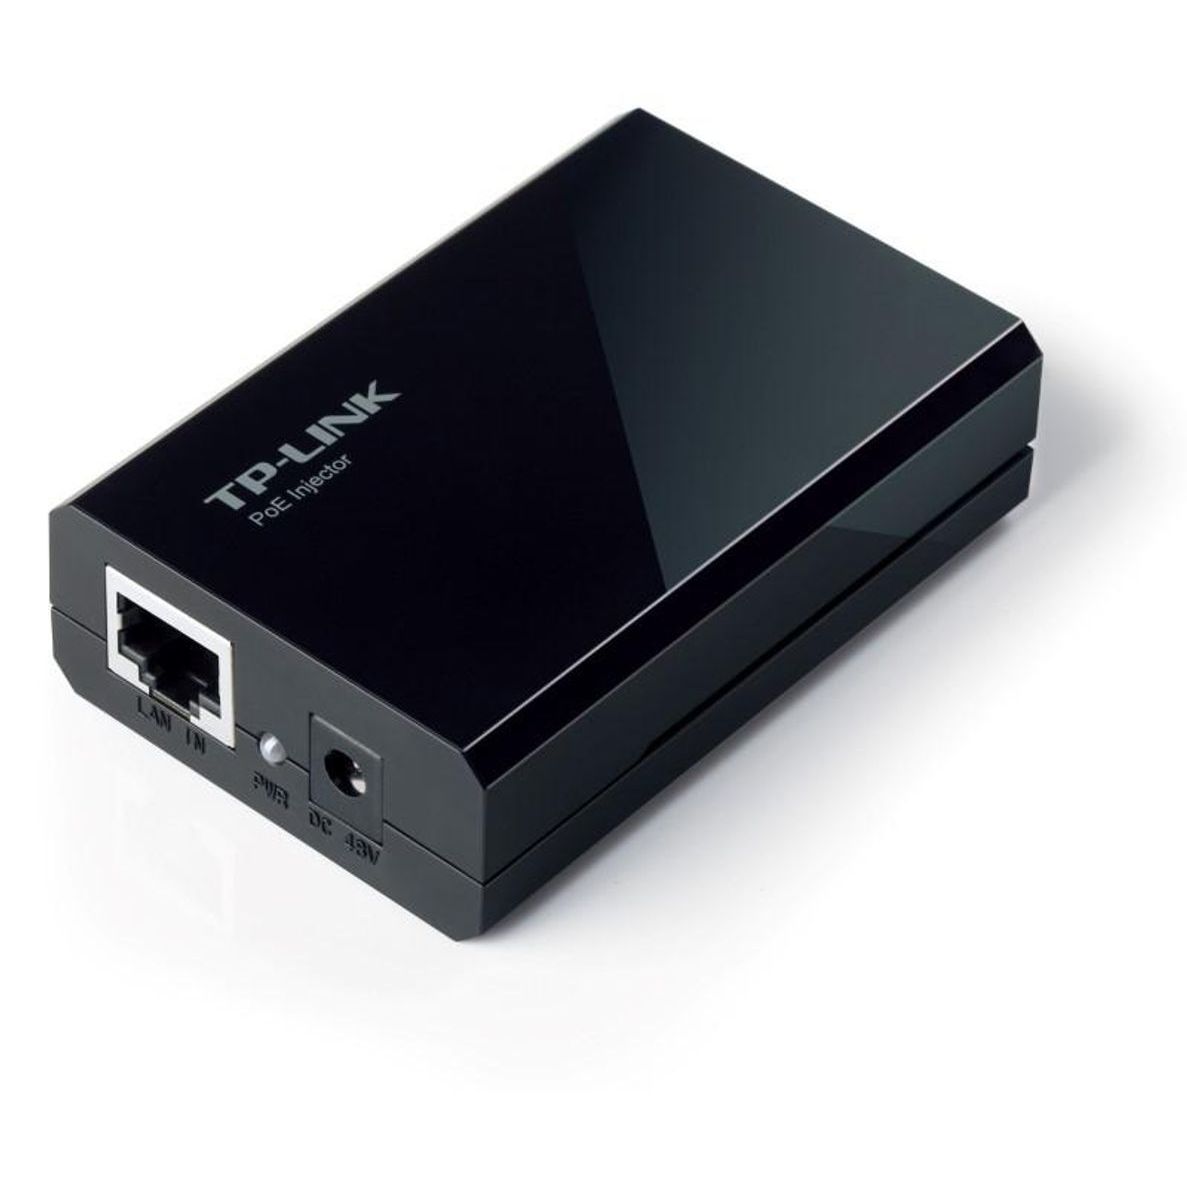 TL-POE150S - TP-Link Single port PoE Supplier Adapter (Injector), IEEE 802.3af compliant, up to 100m